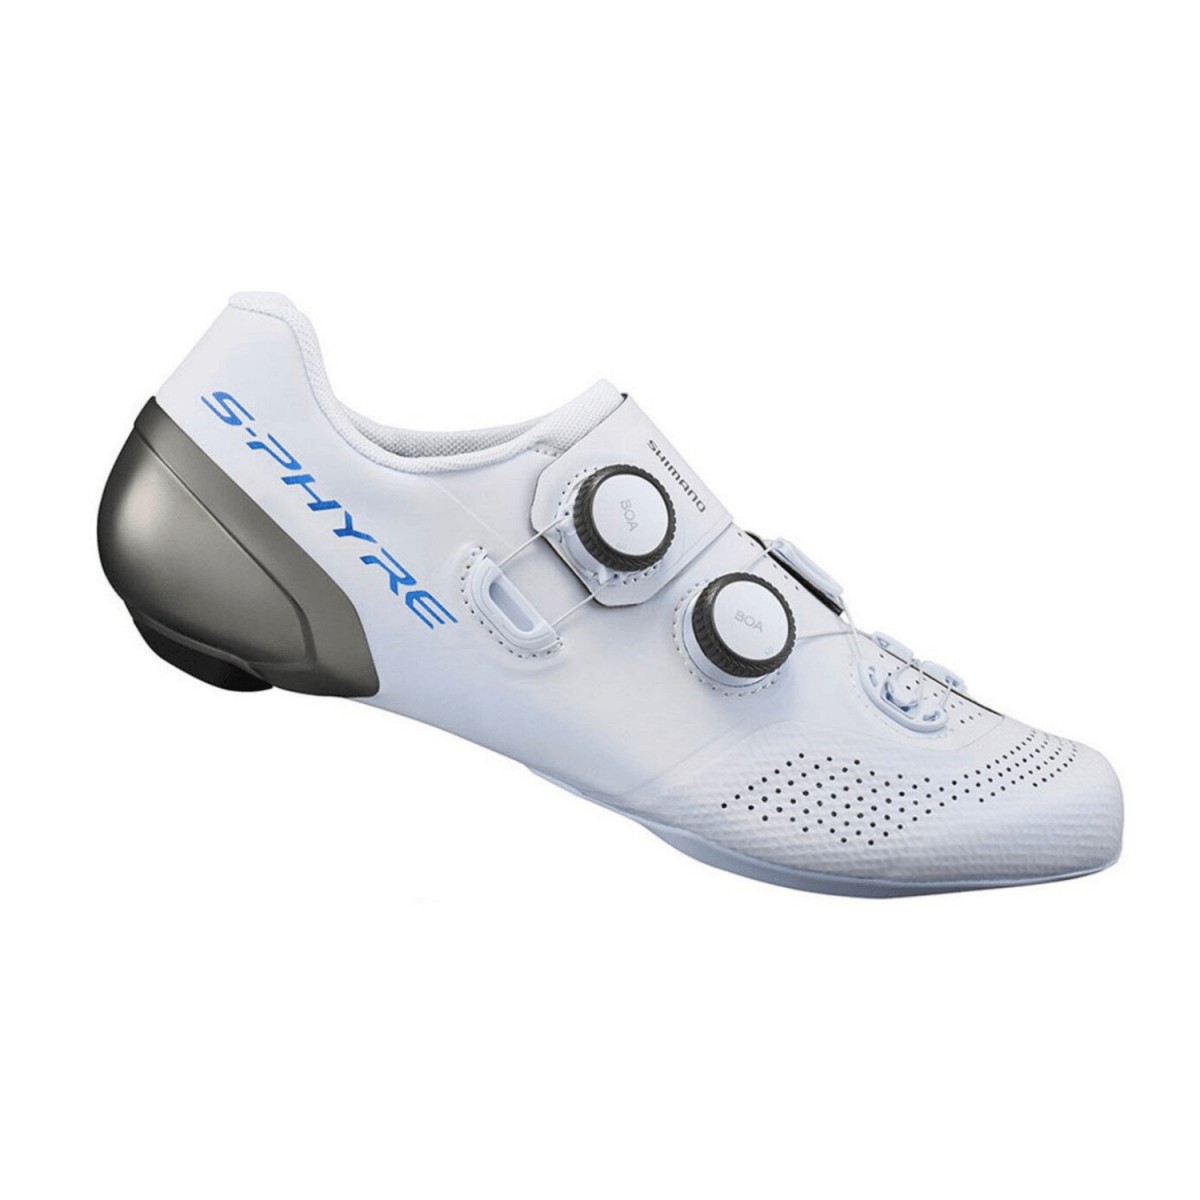 Shimano RC902 S-PHYRE White Shoes, Size 42 - EUR